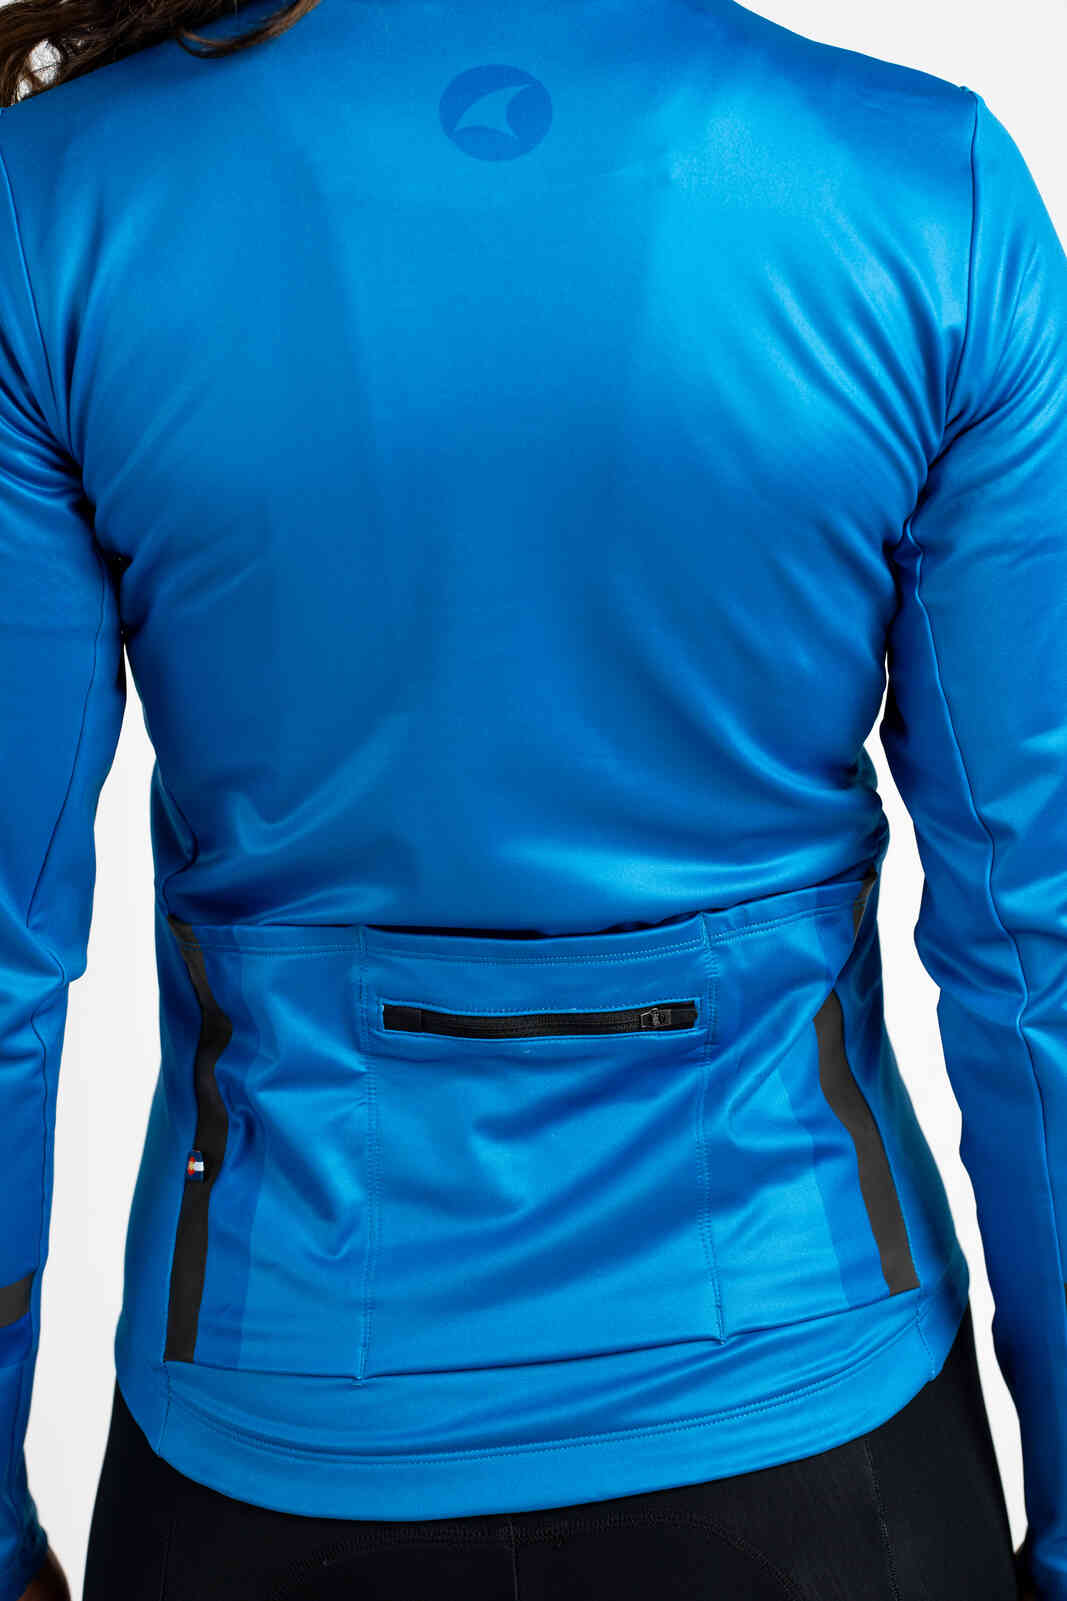 Women's Blue Thermal Cycling Jersey - Back Pockets